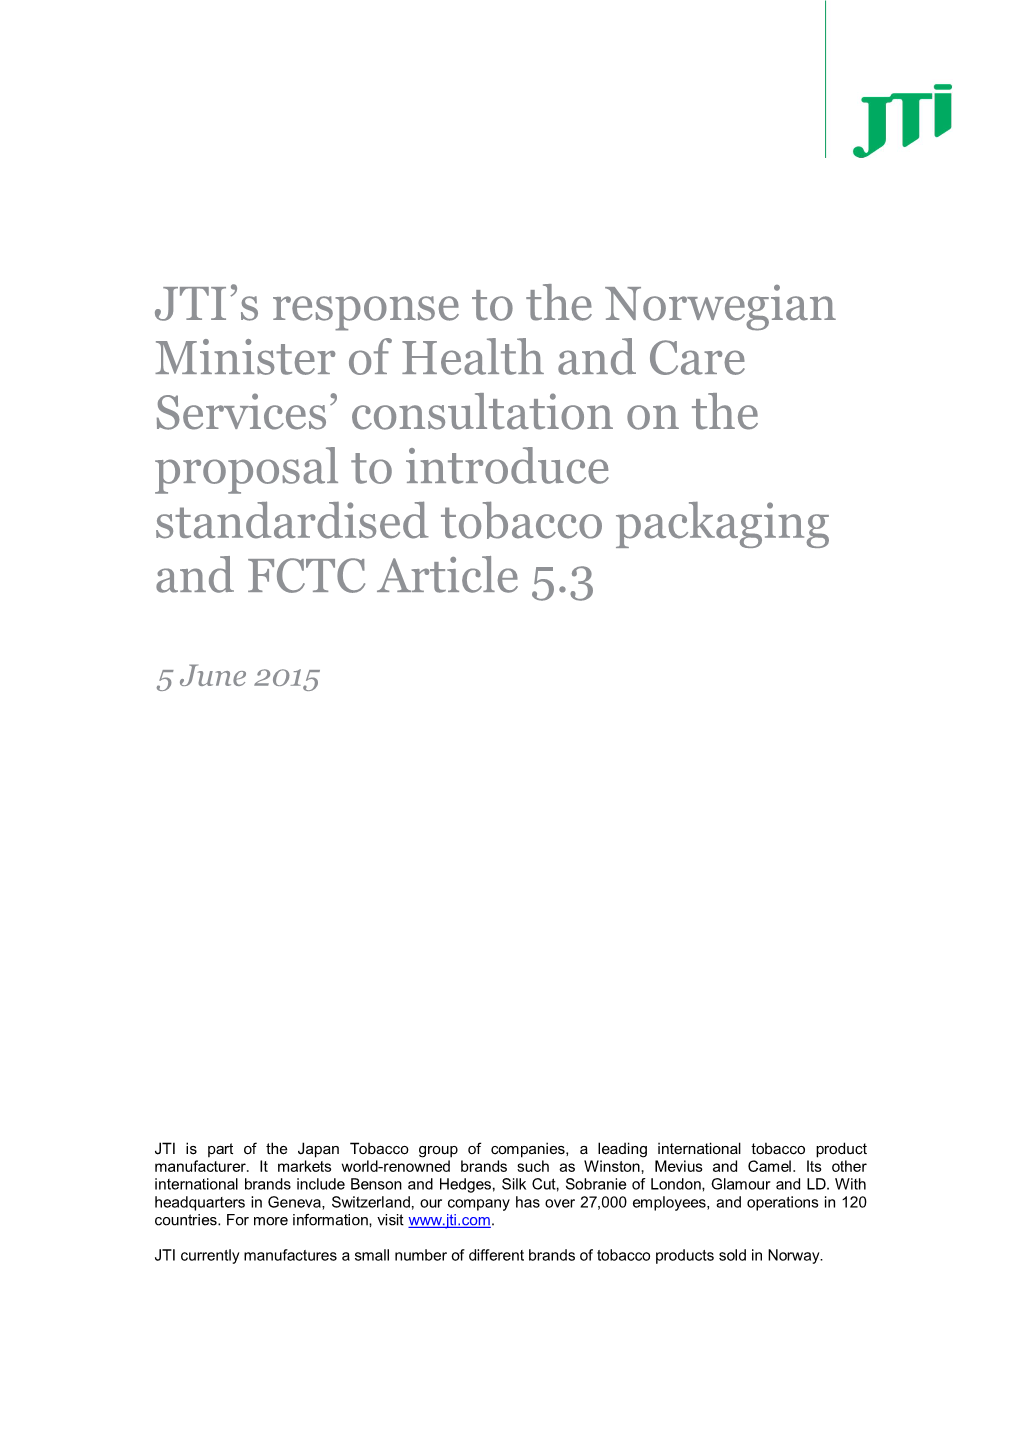 JTI's Response to the Norwegian Minister of Health and Care